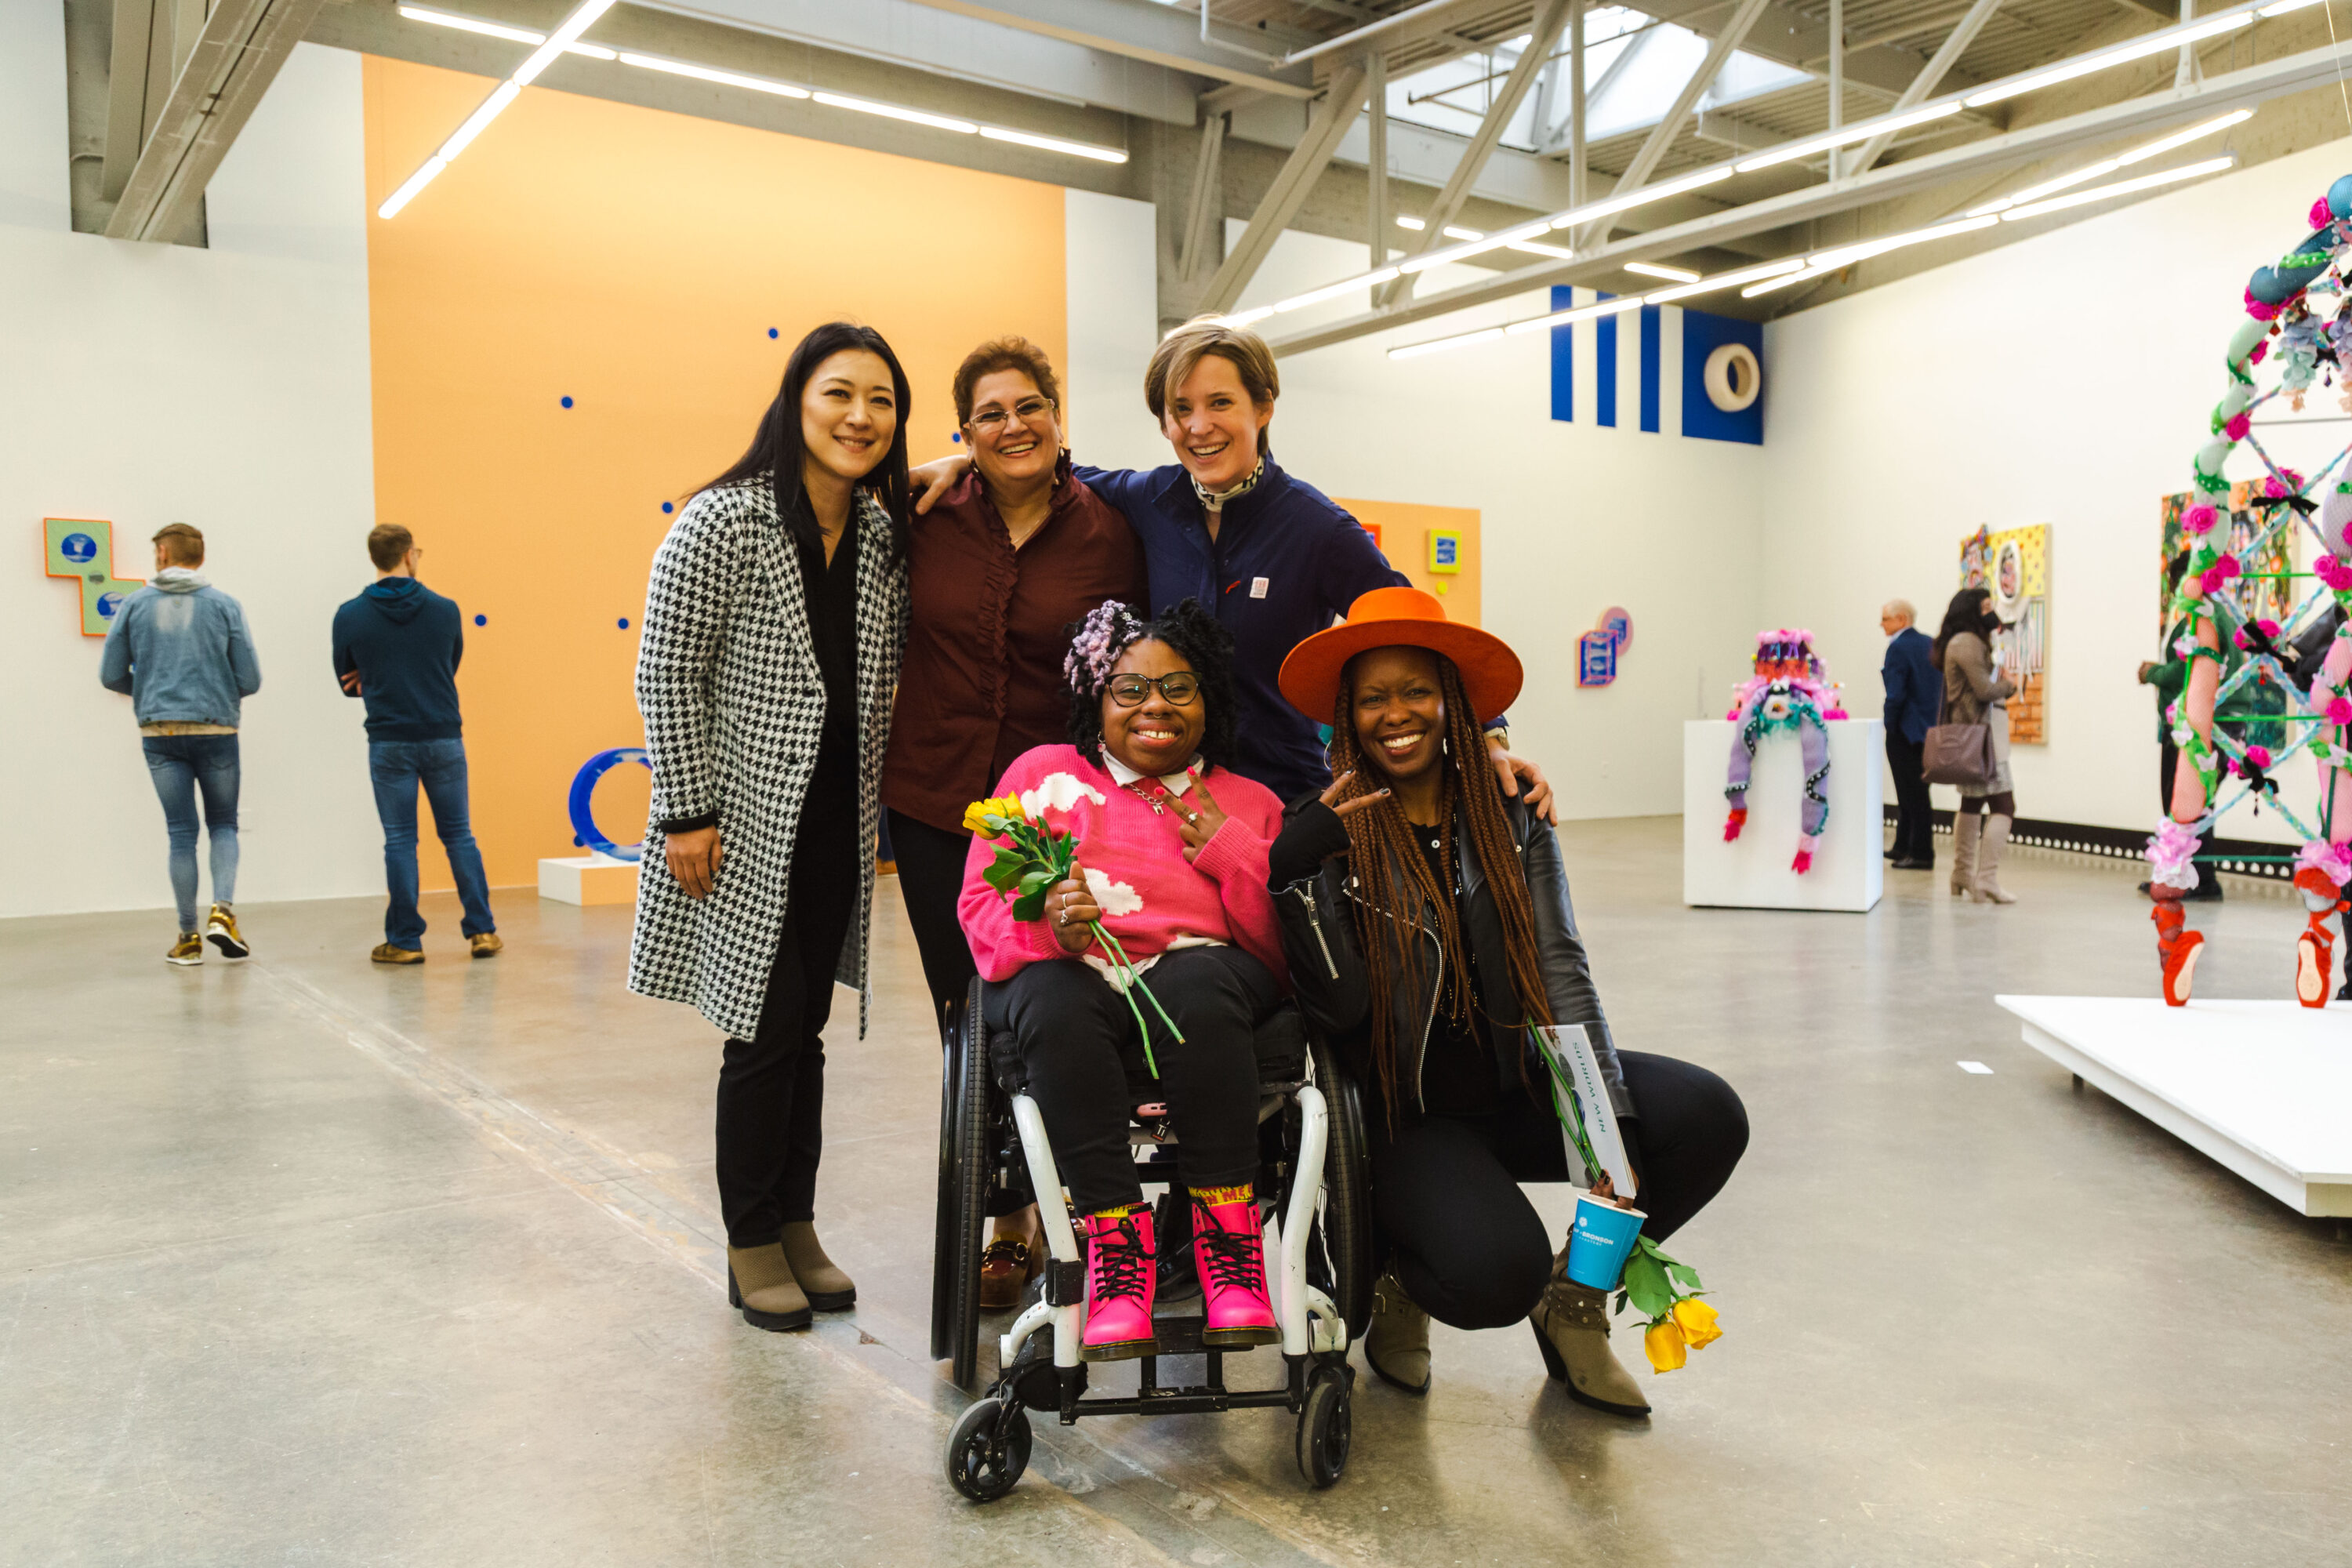 A group of women pose for a photograph in a gallery space filled with colorful sculptures and two dimensional works.